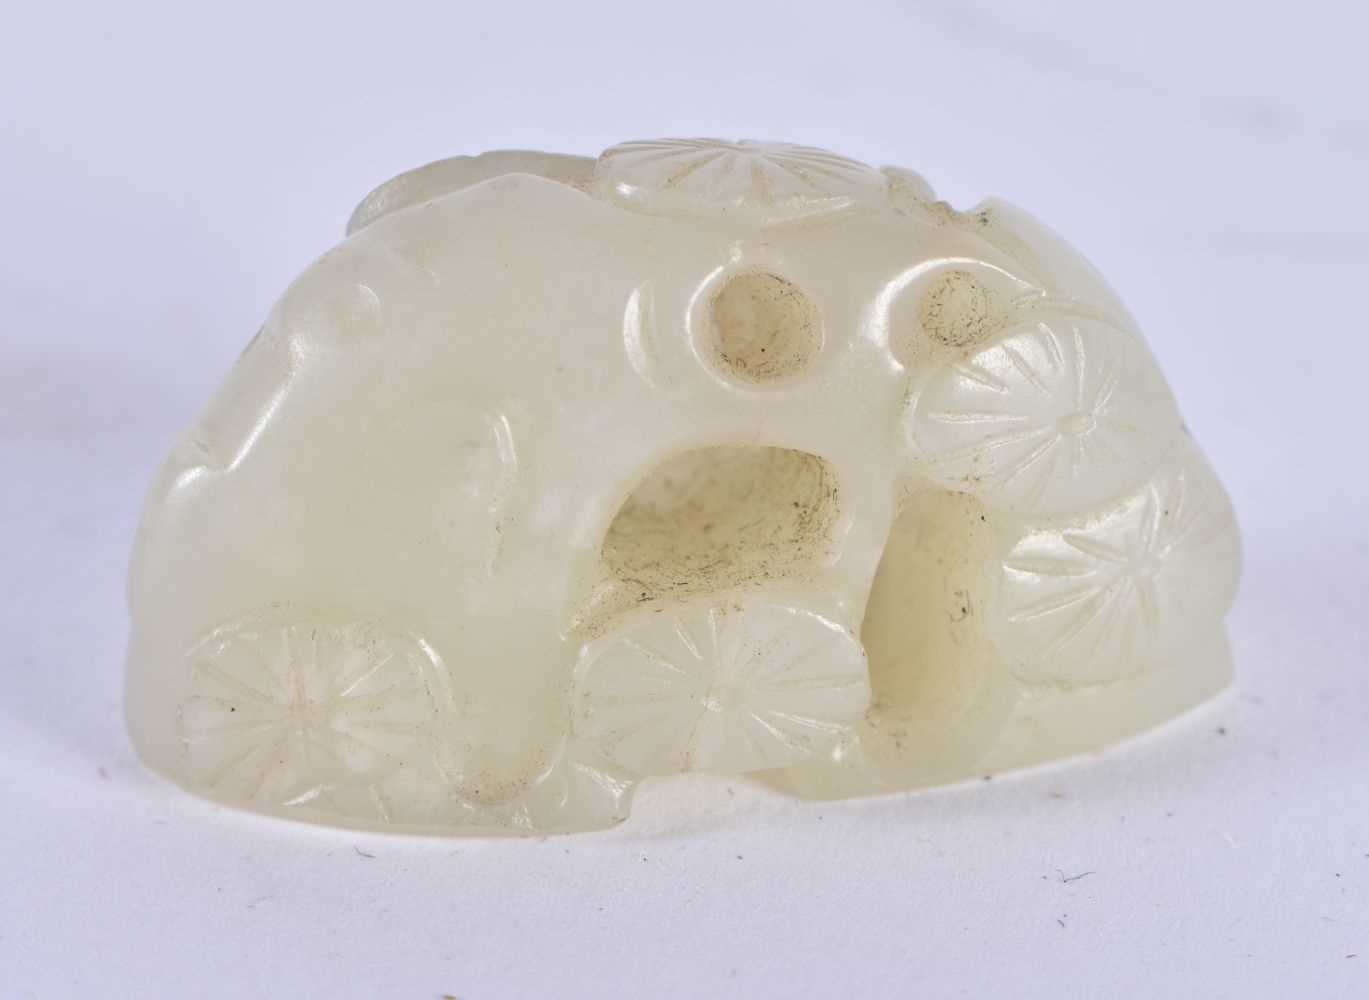 TWO CHINESE QING DYNASTY JADE CARVINGS together with a nut. Largest 5 cm x 3 cm. (3) - Image 5 of 7